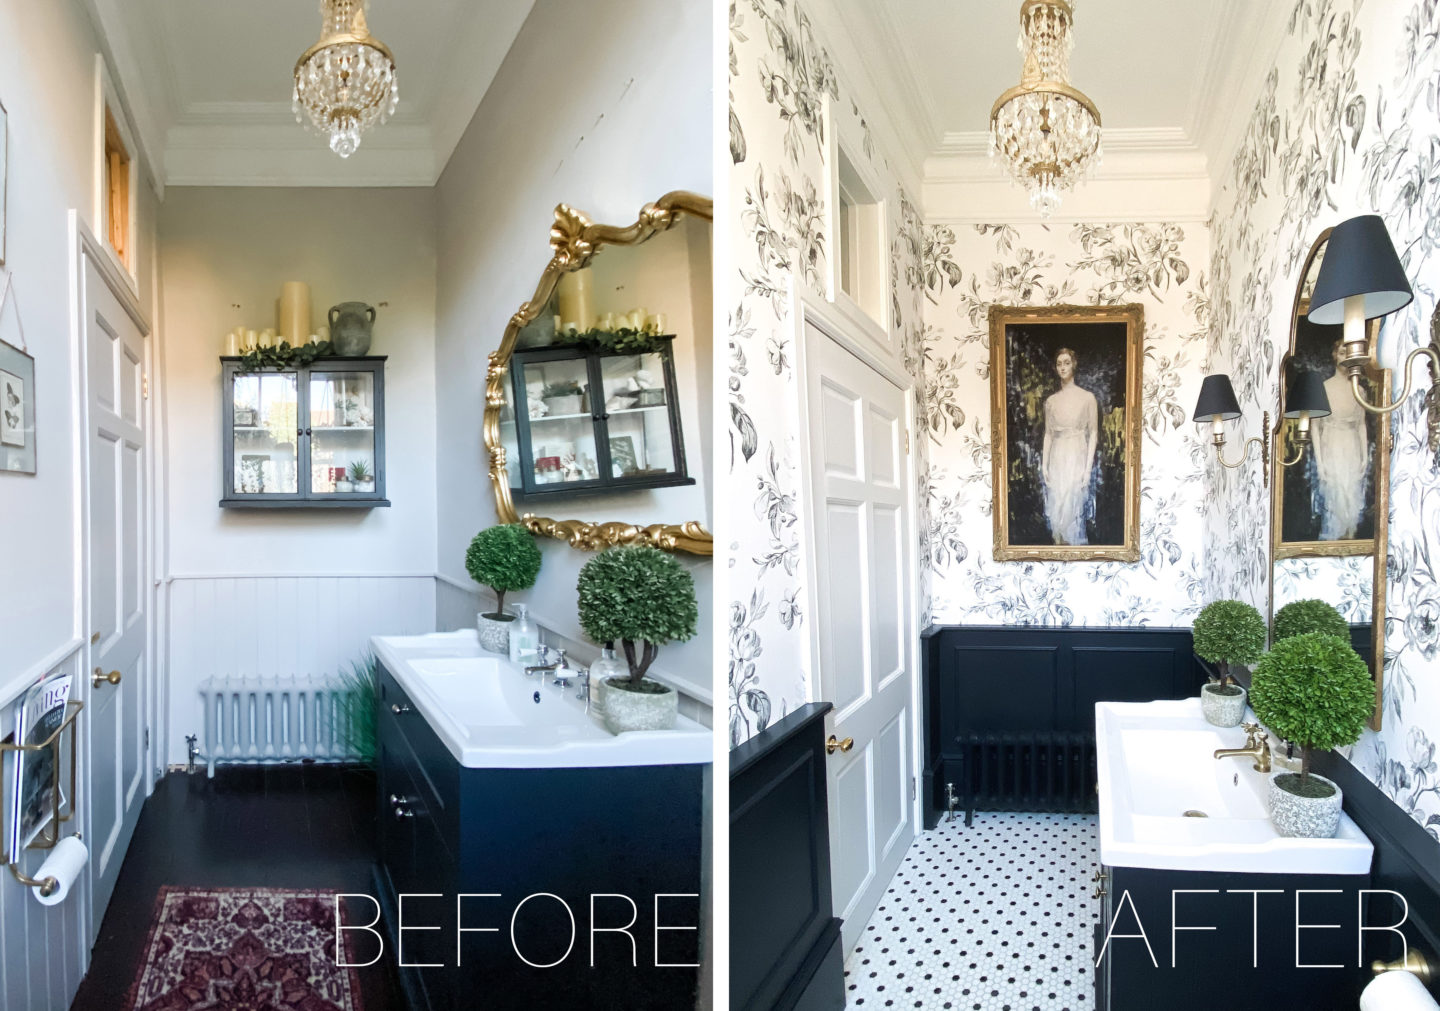 OUR POWDER ROOM REVEAL